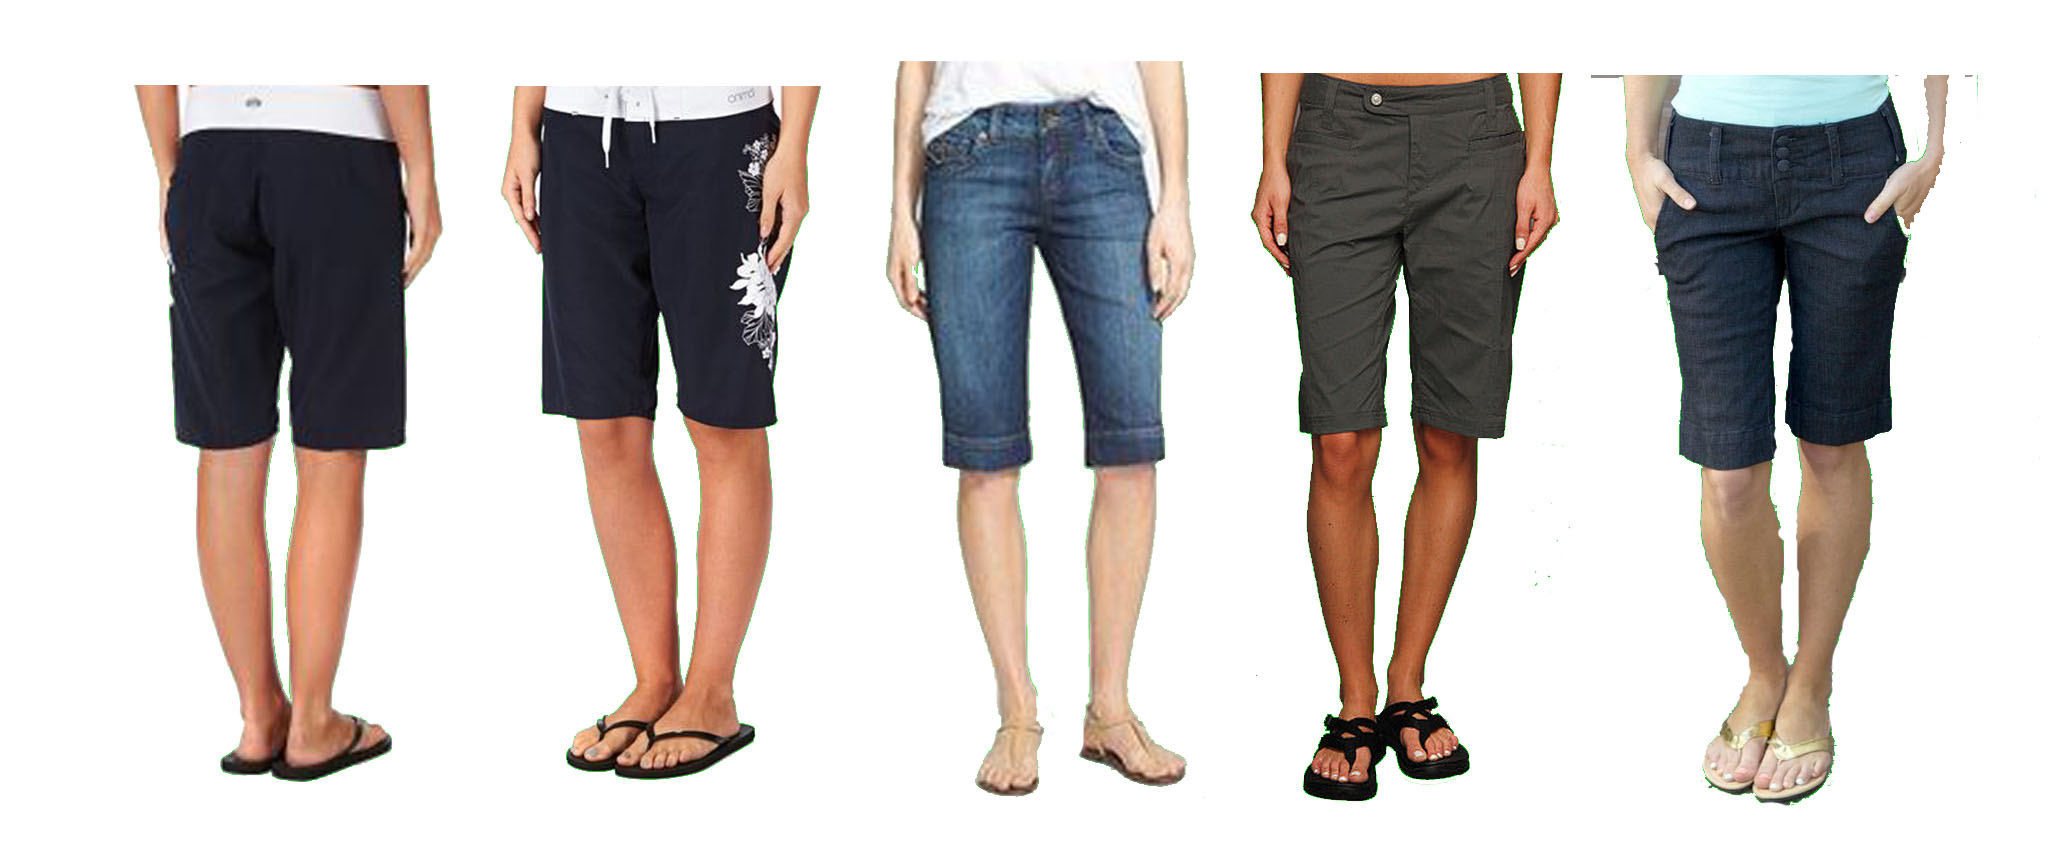 Tall Men's Shorts - 8 to 16